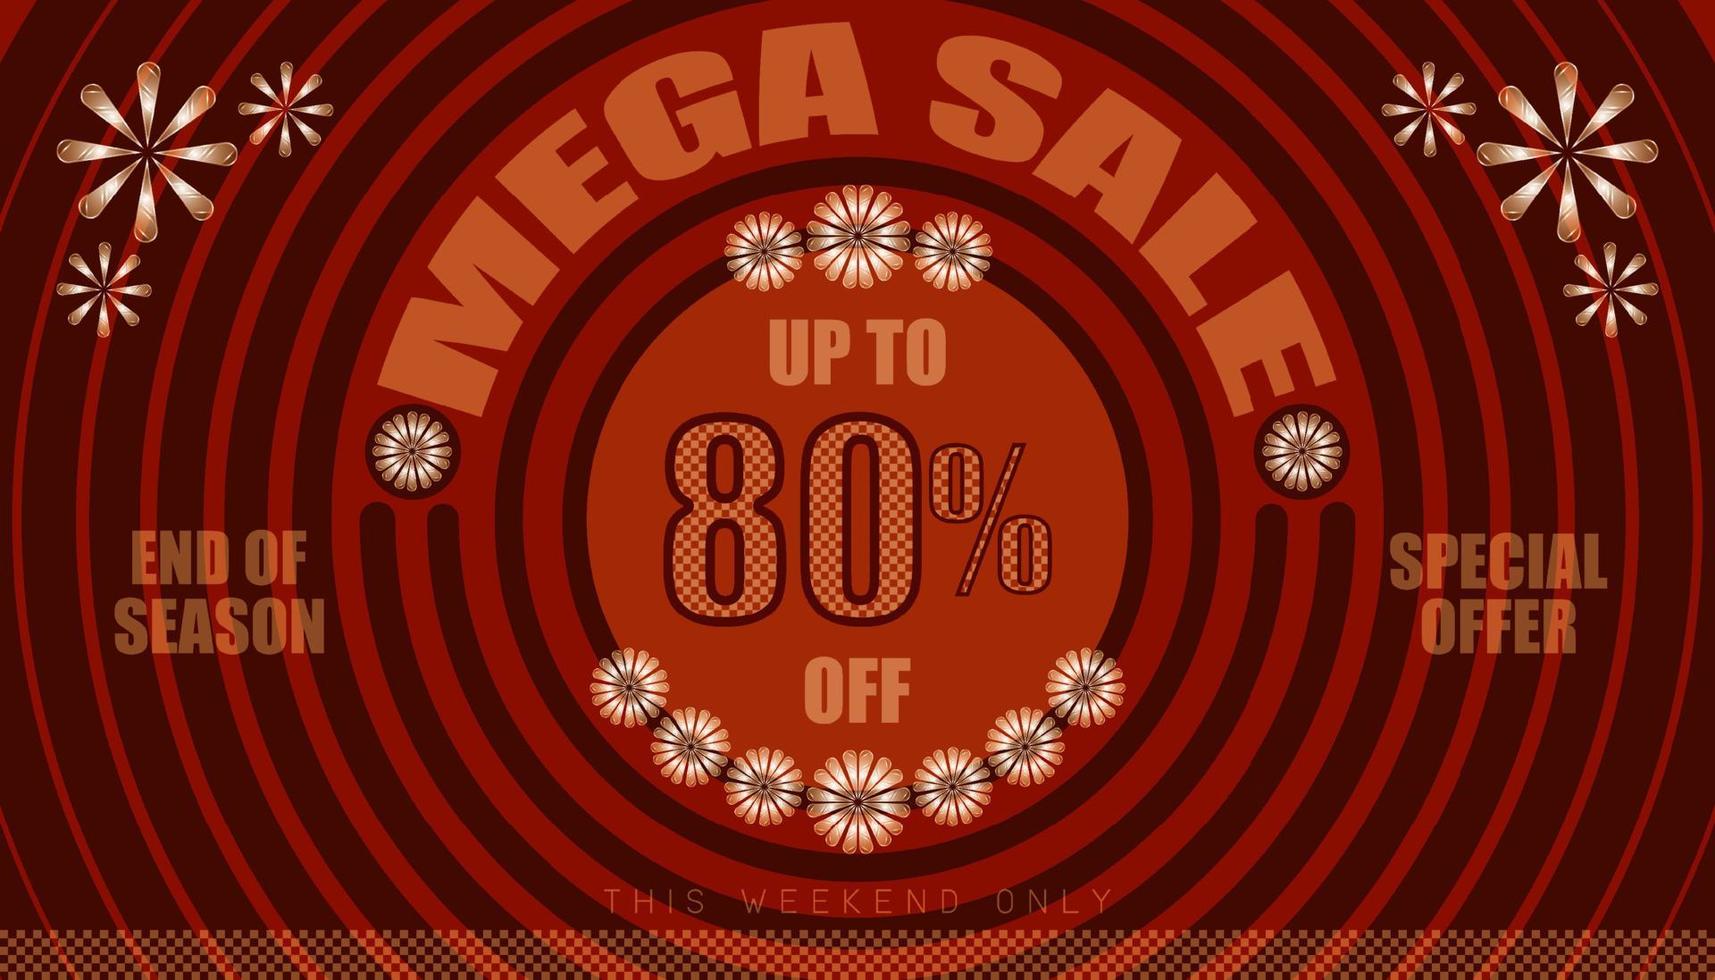 mega sale up to 80 percent end of year special offer. vintage retro style. small to big circle from center. creative poster design. vector illustration eps10